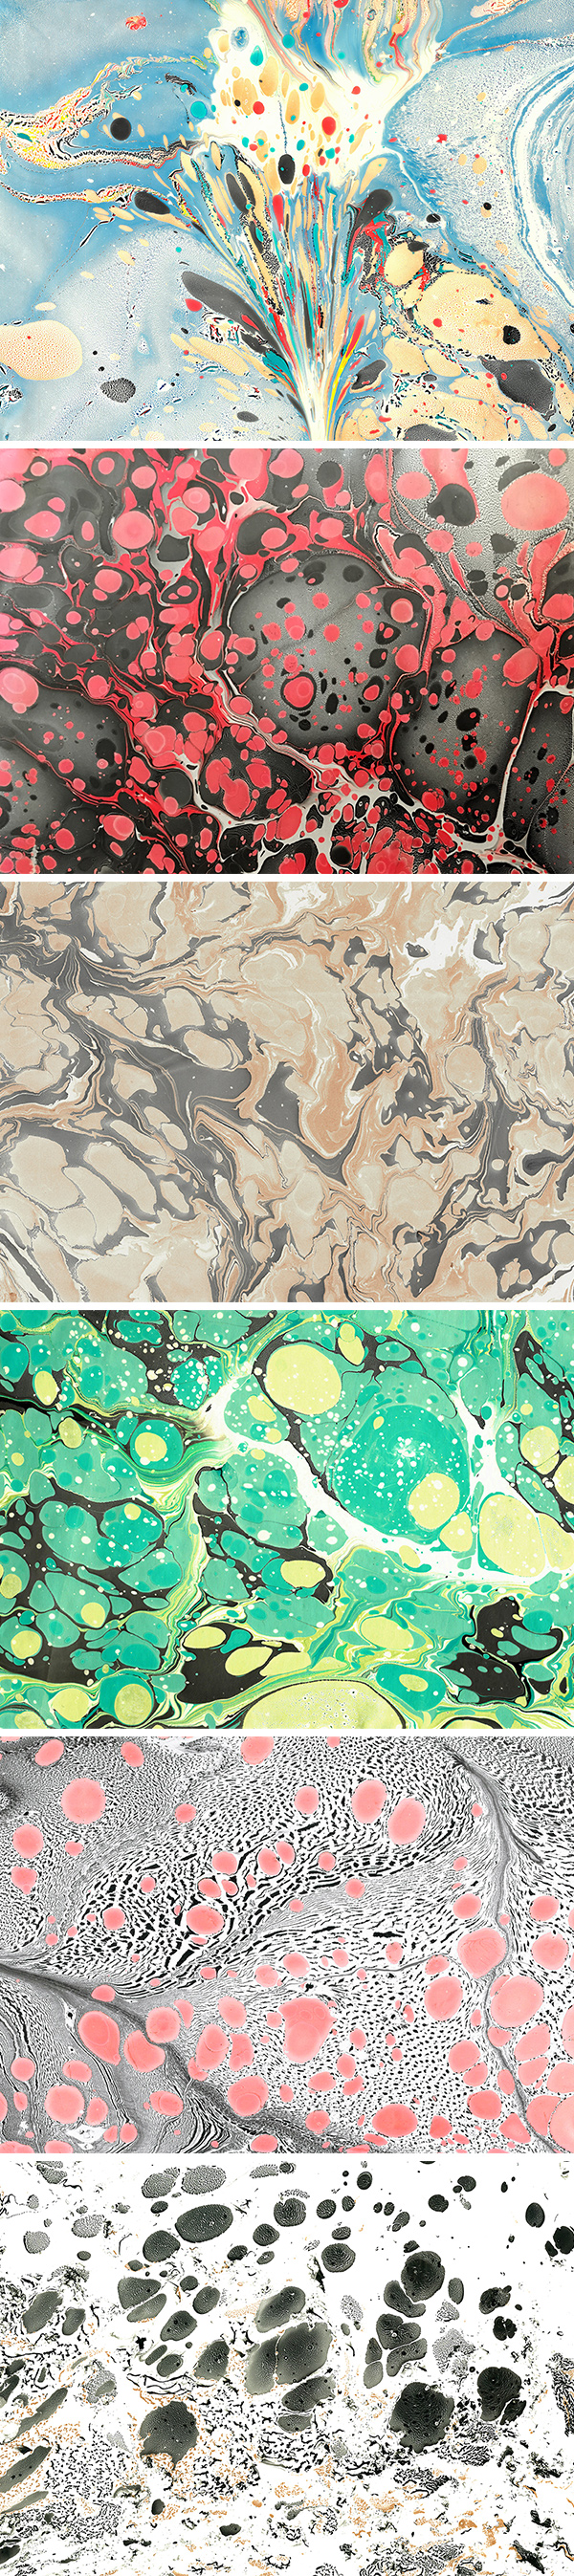 Marbling Texture Gold Ink Texture Design Graphic by Ju Design